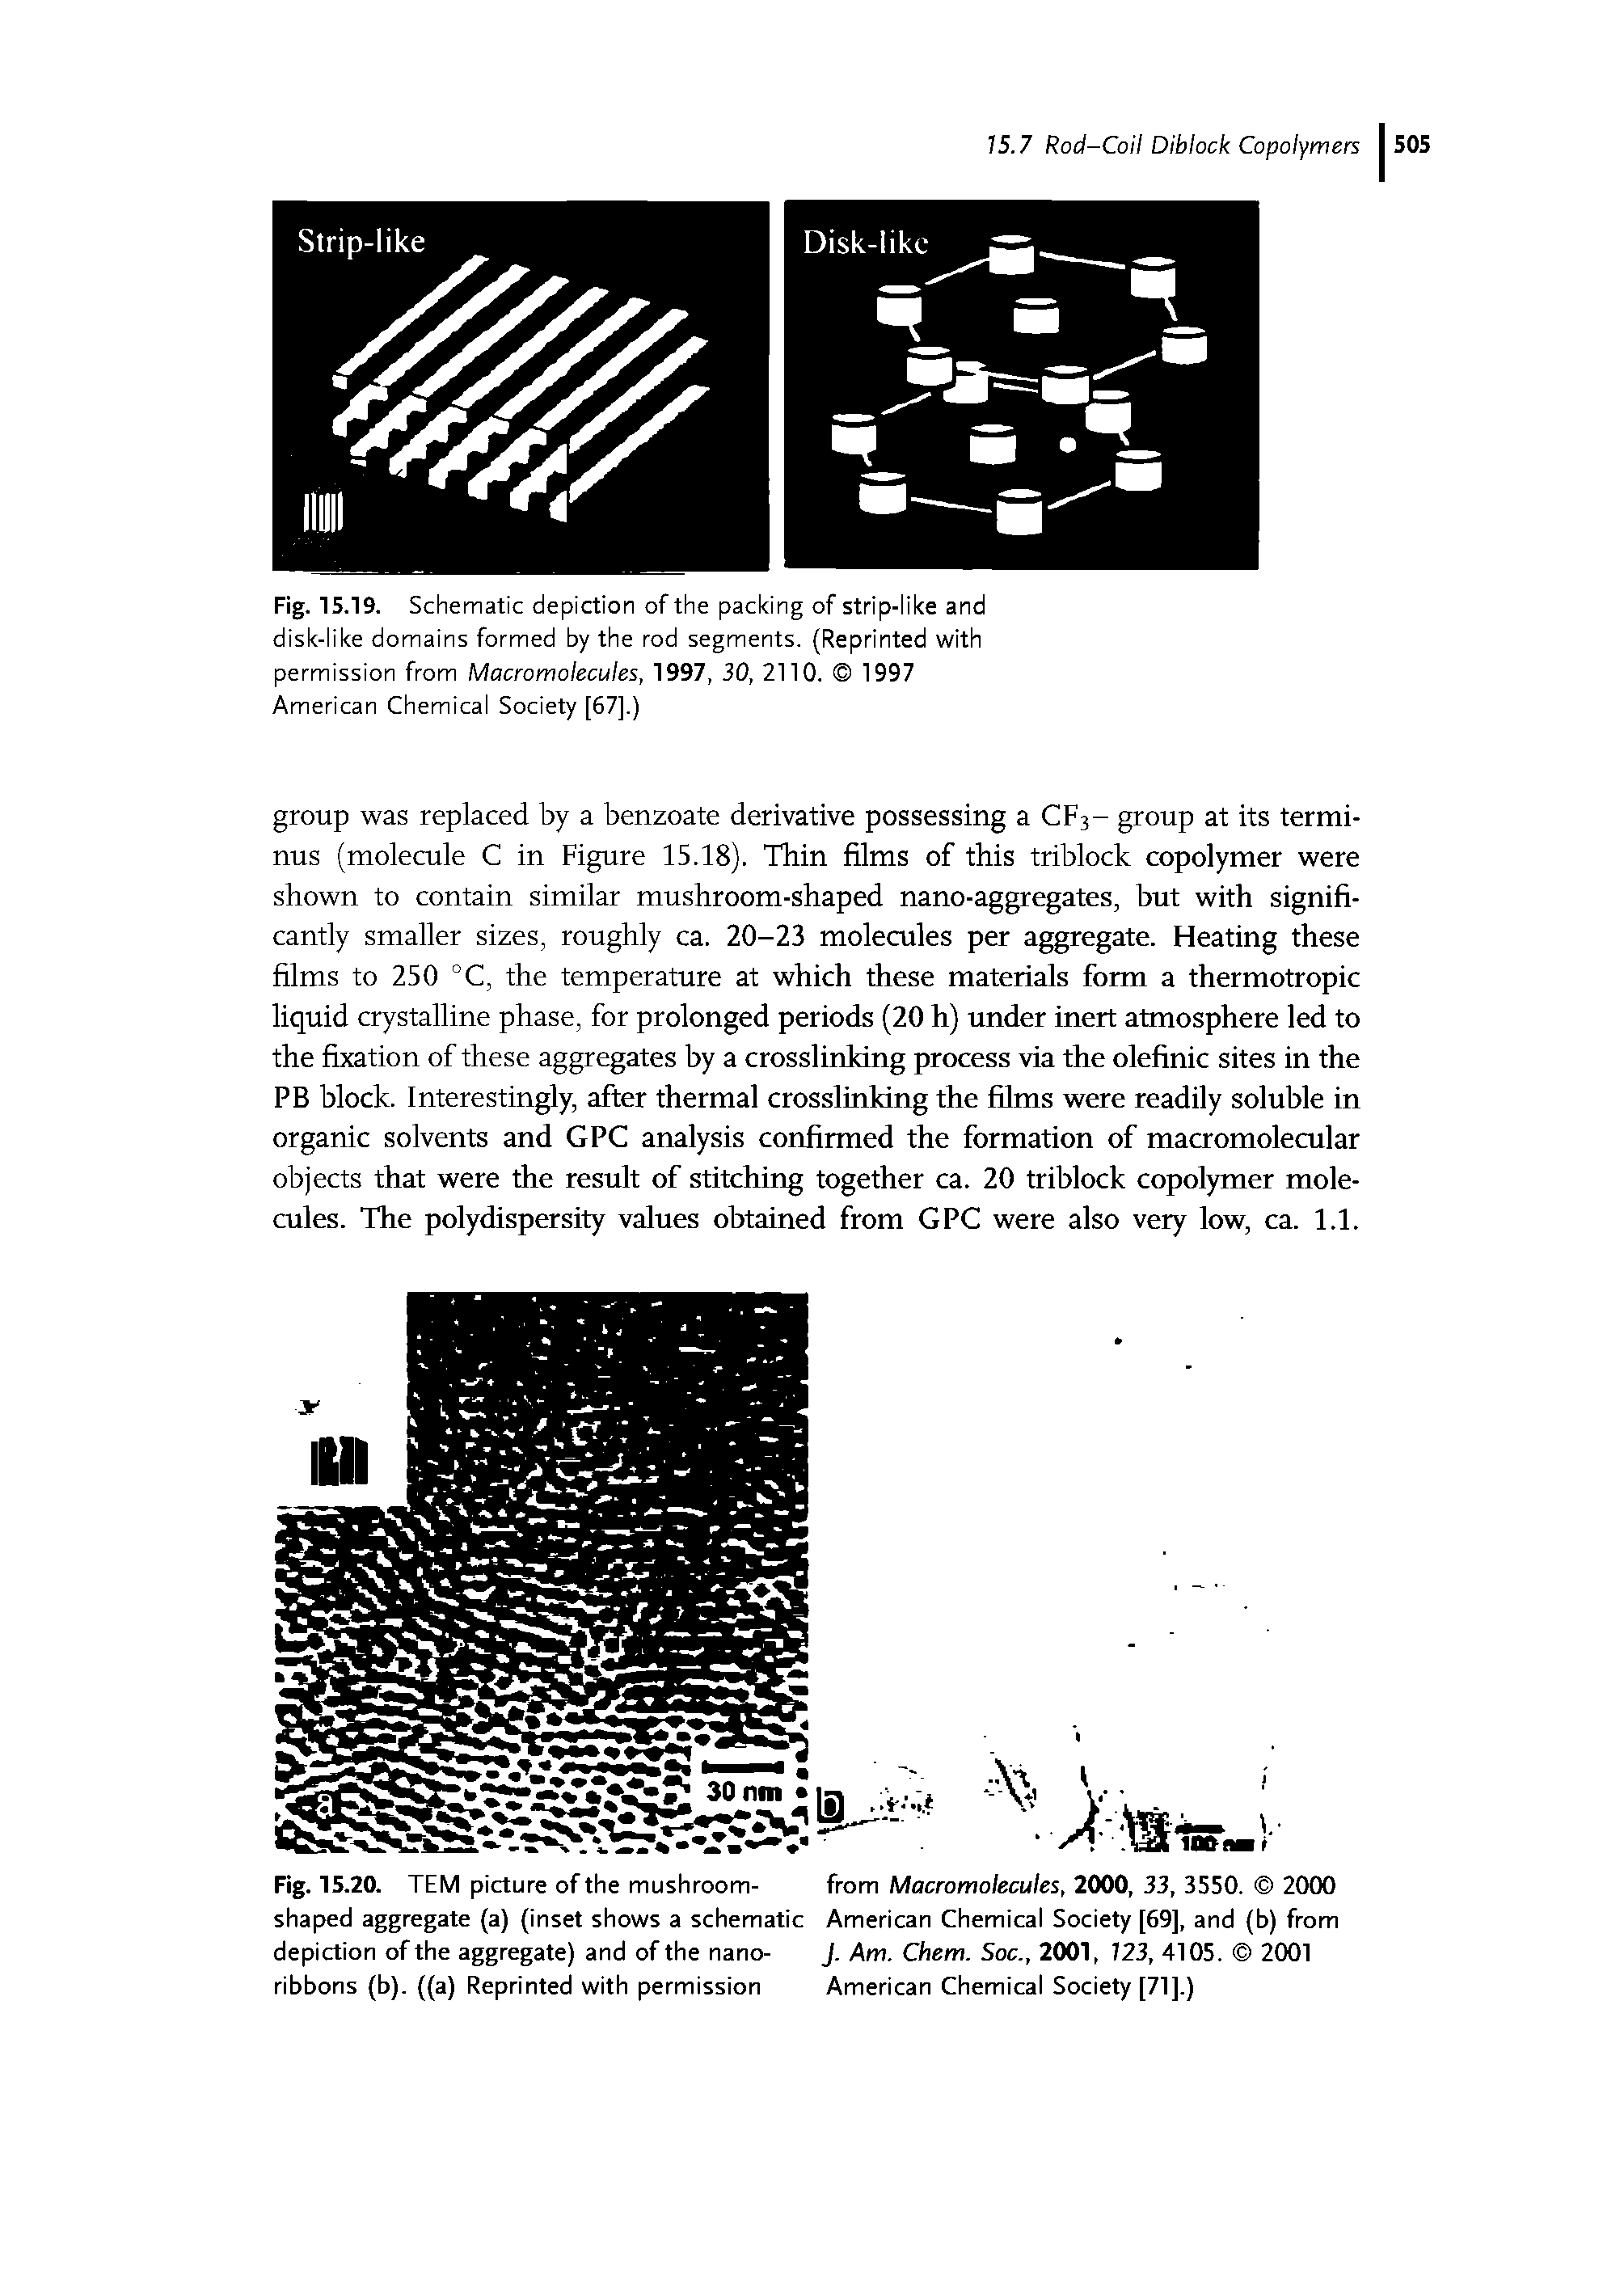 Fig. 15.19. Schematic depiction of the packing of strip-like and disk-like domains formed by the rod segments. (Reprinted with permission from Macromolecules, 1997, 30, 2110. 1997 American Chemical Society [67].)...